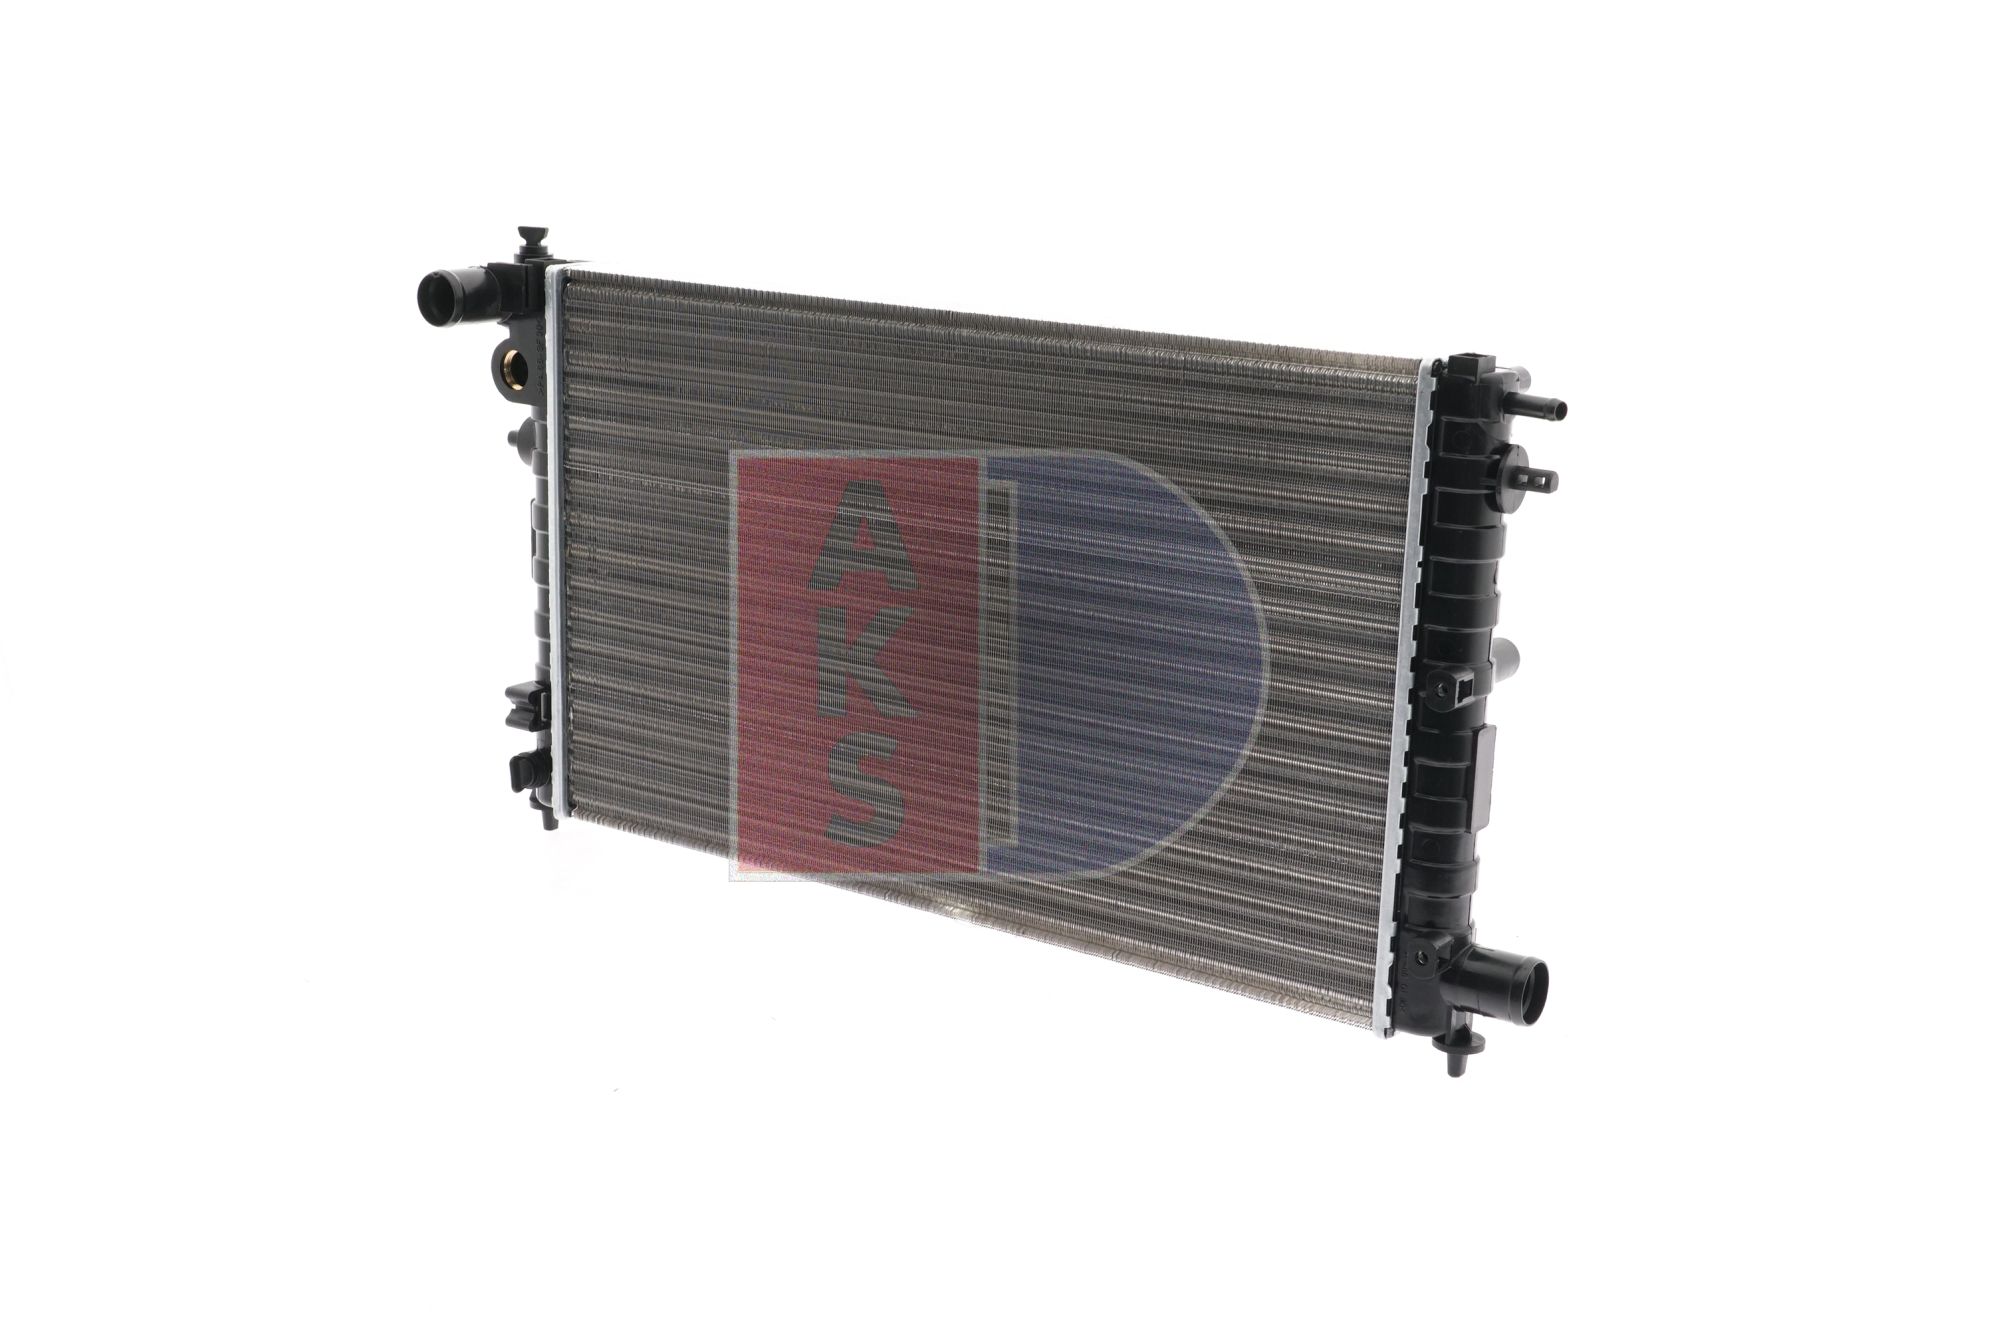 AKS DASIS 060820N Engine radiator 530 x 297 x 32 mm, Mechanically jointed cooling fins